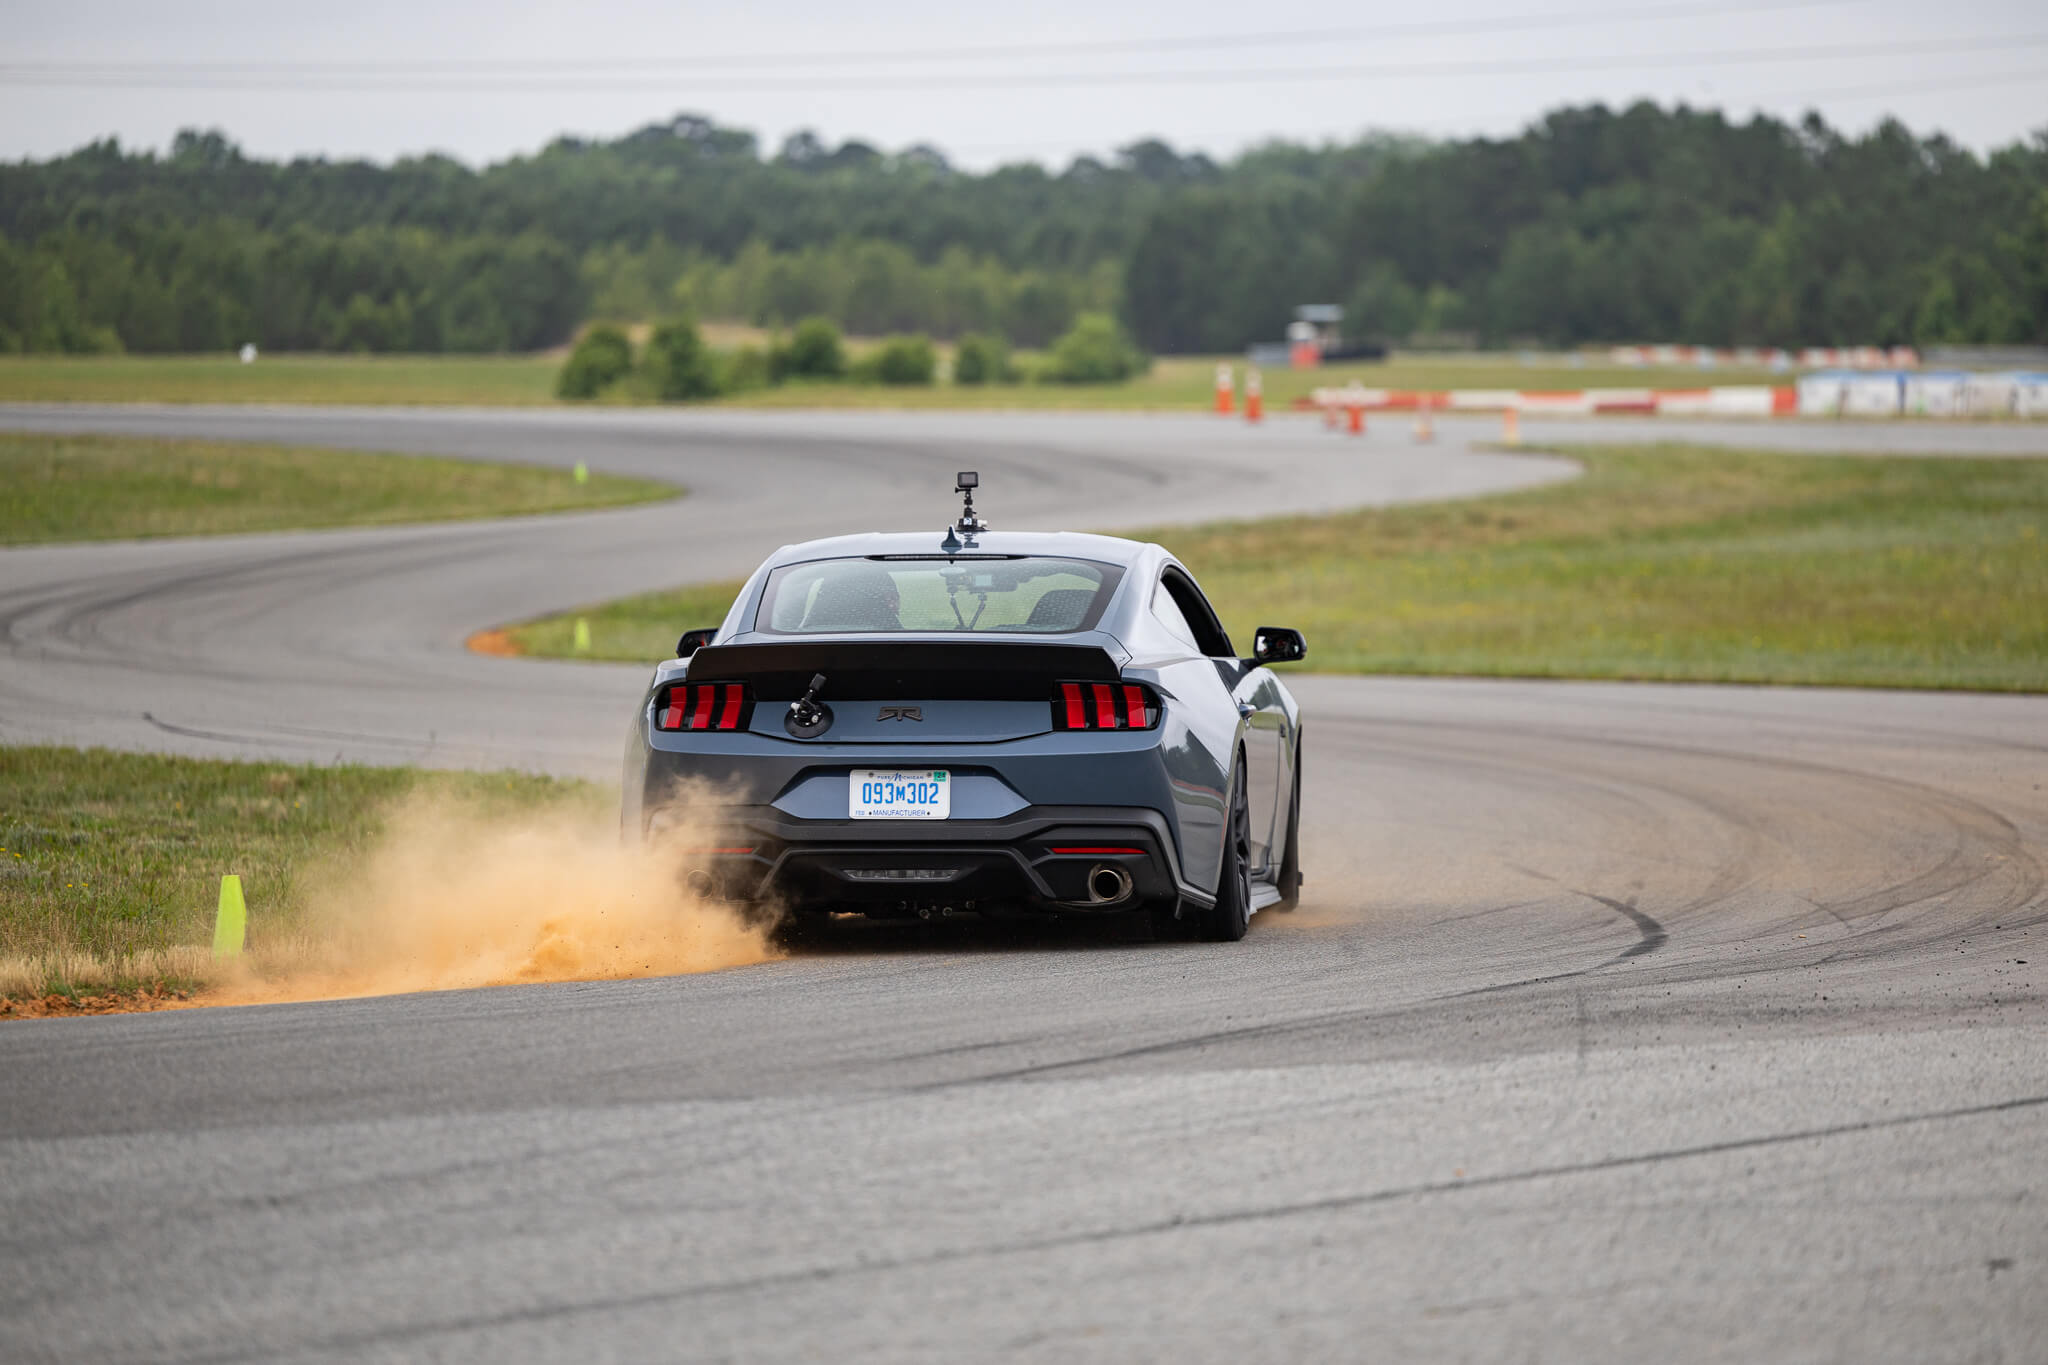 S650 Mustang RTR Vehicles Suspension Validation Testing on the 7th Generation Mustang JCOL5200